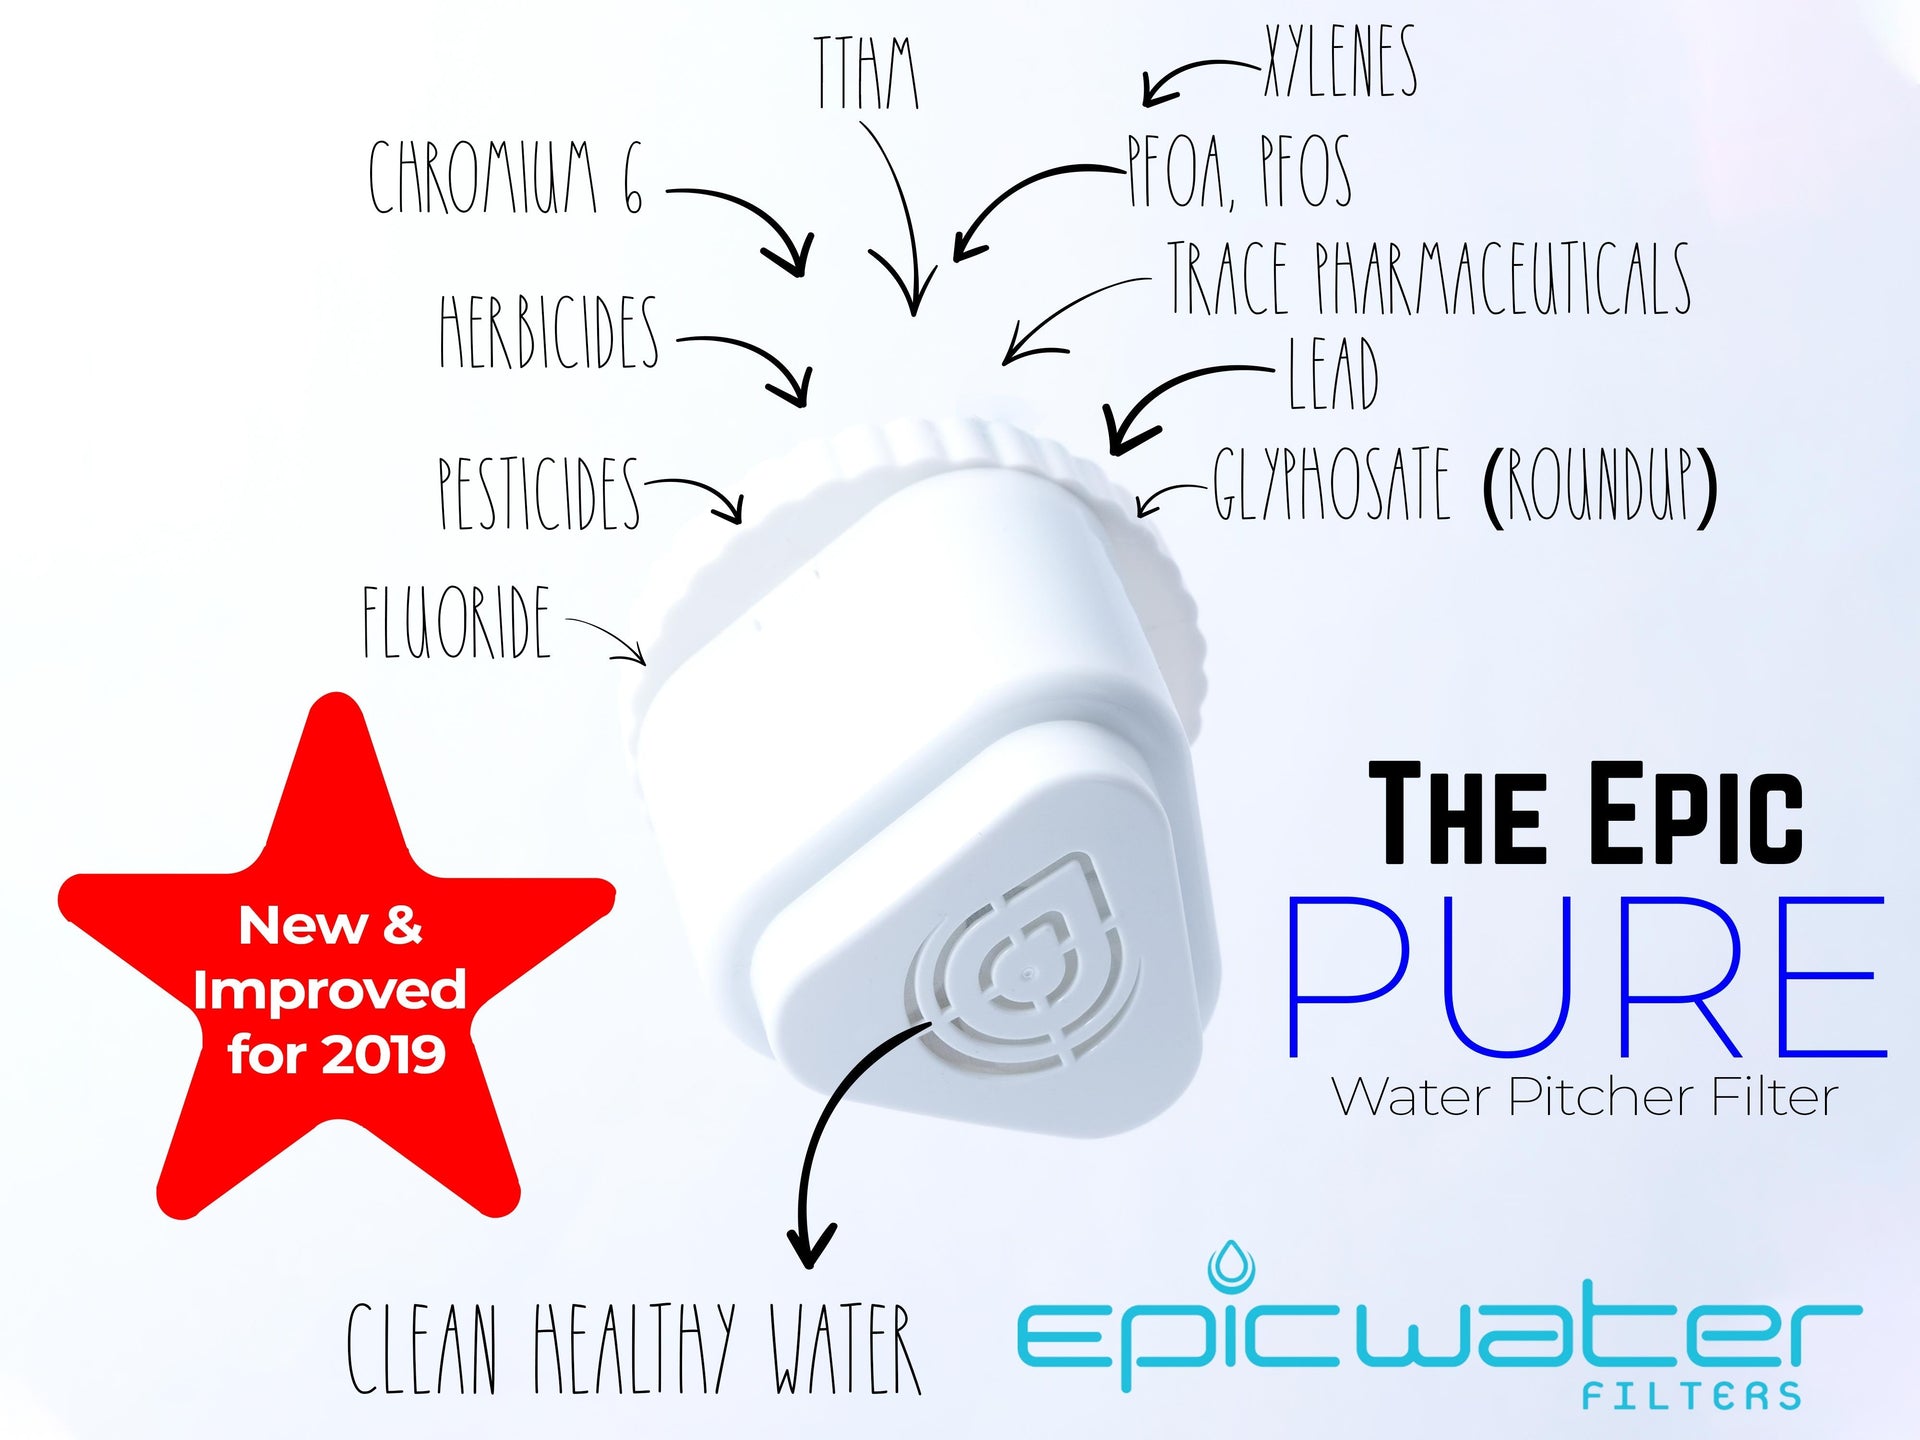 Epic Pure Water Filter Replacement for clean healthy water